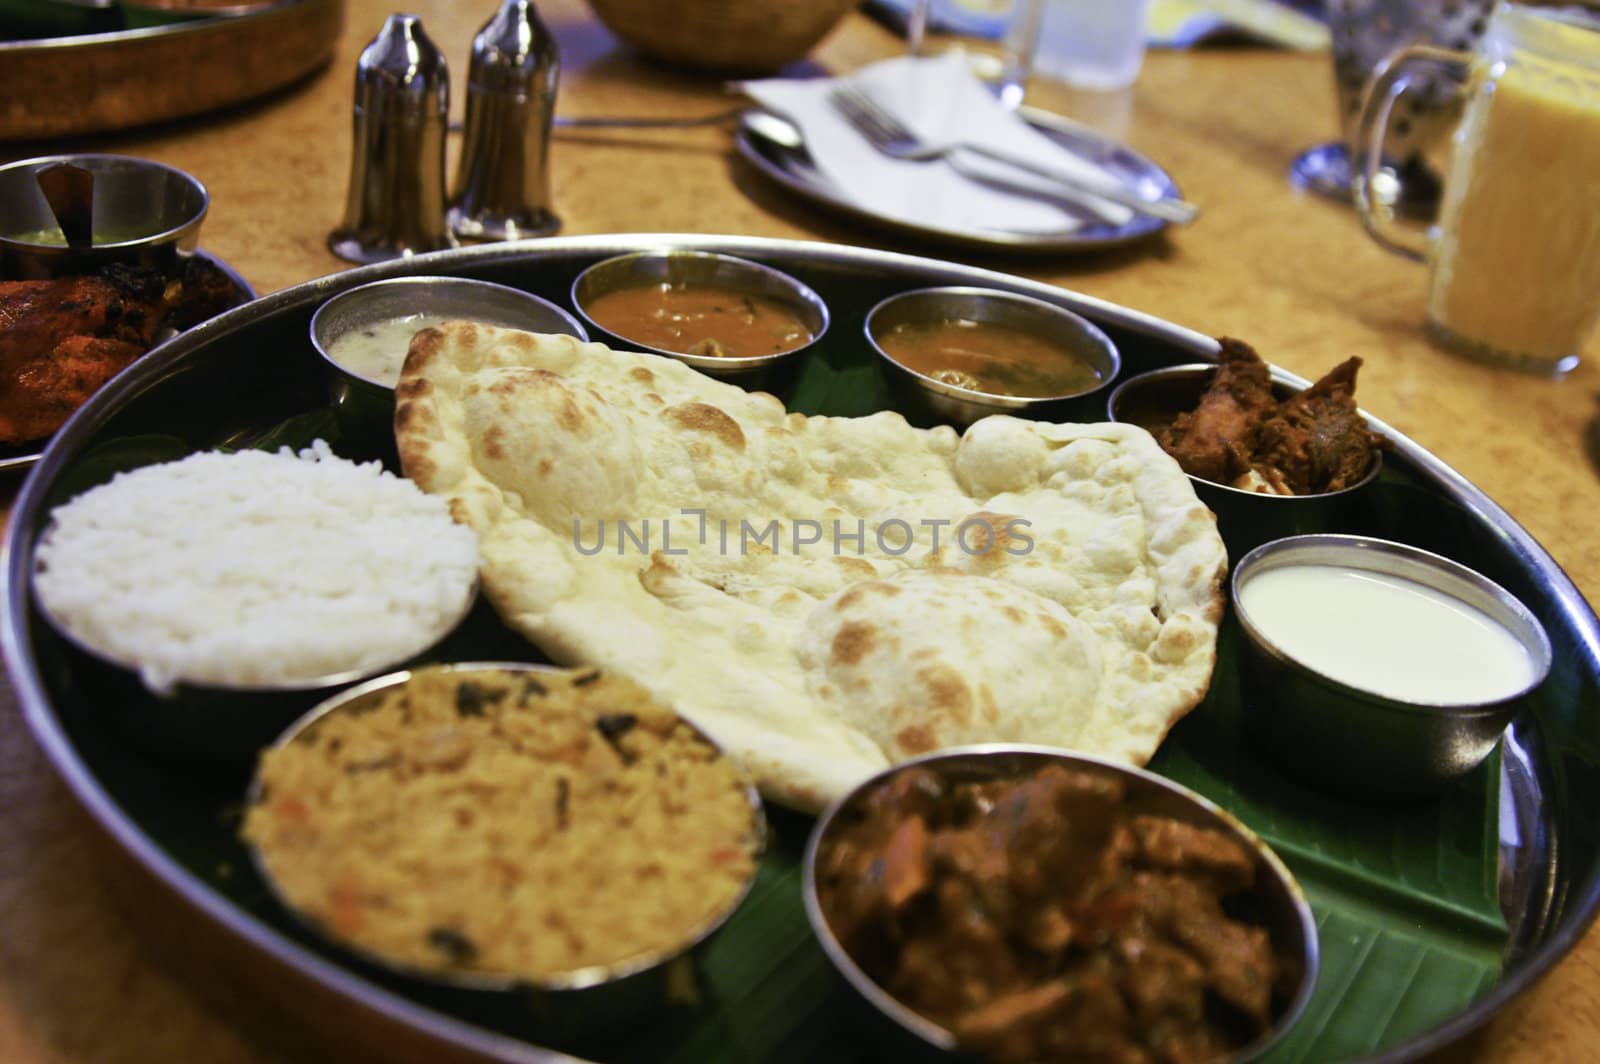 A traditional indian platter of various food